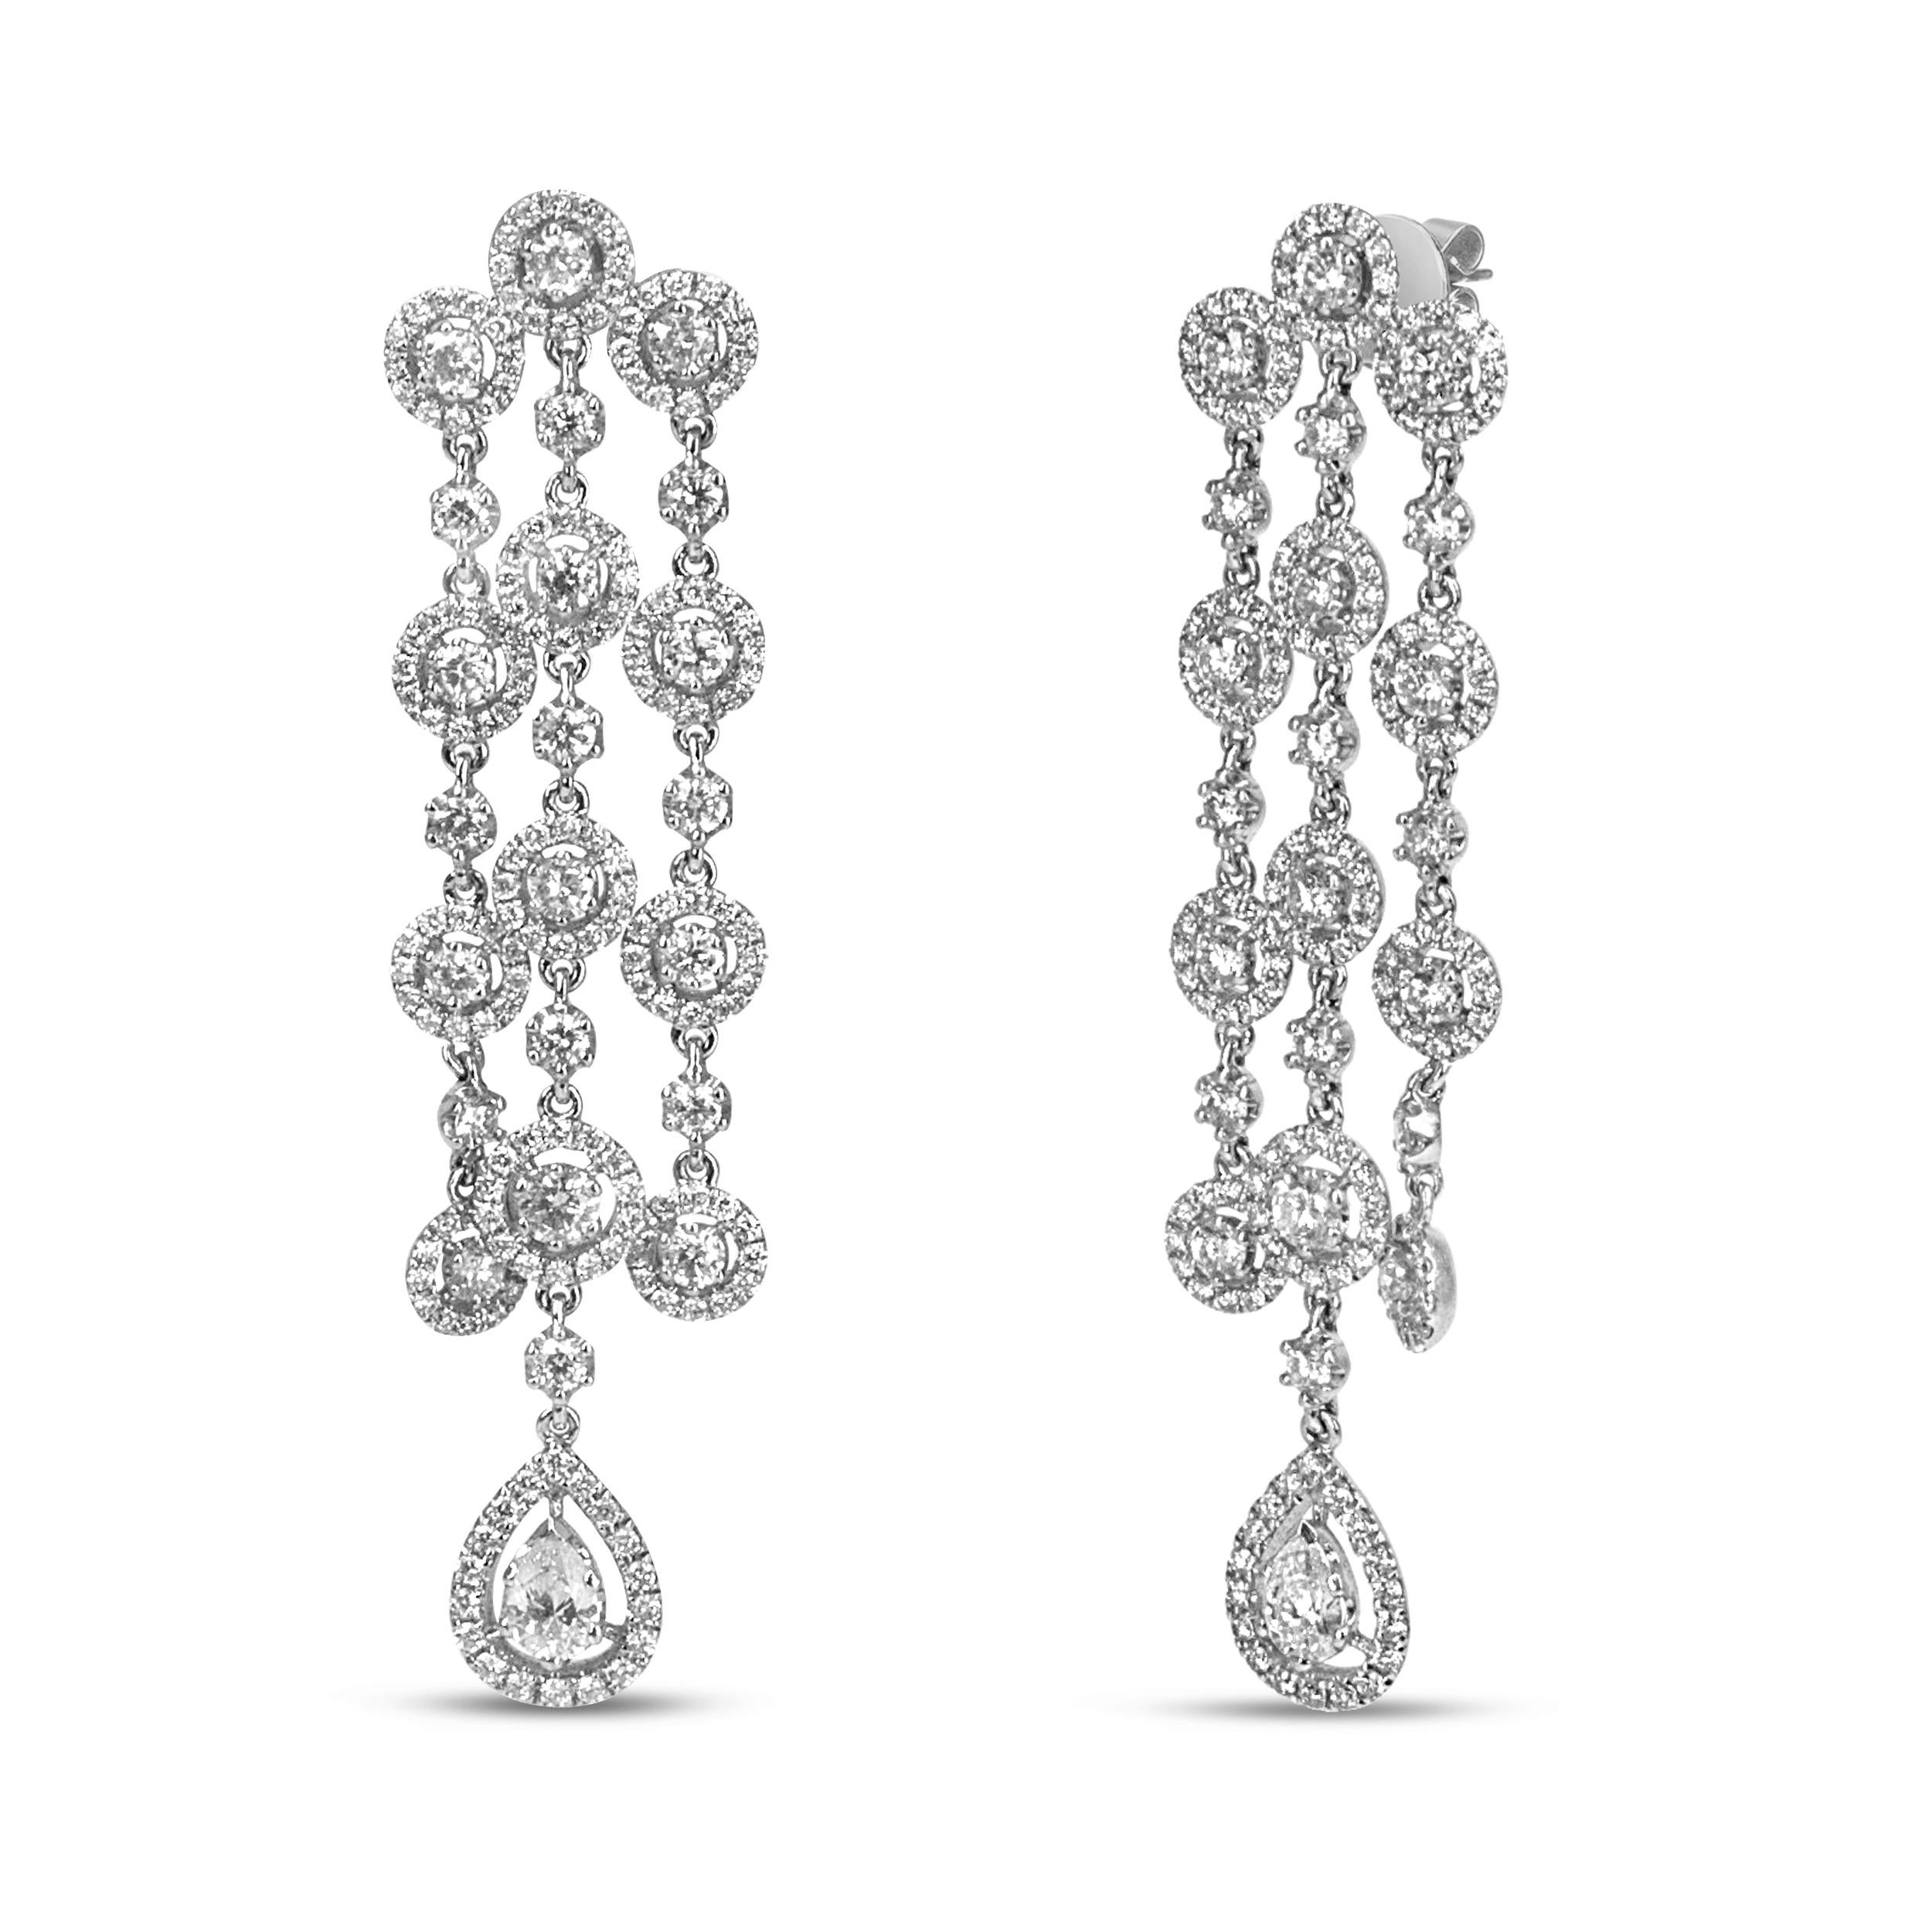 Light up the night in these ravishing waterfall diamond earrings that boast a beautiful, sparkling movement that will have heads turning the moment you walk into the room! A waterfall cascade of round and pear-shaped diamonds define the ethereal